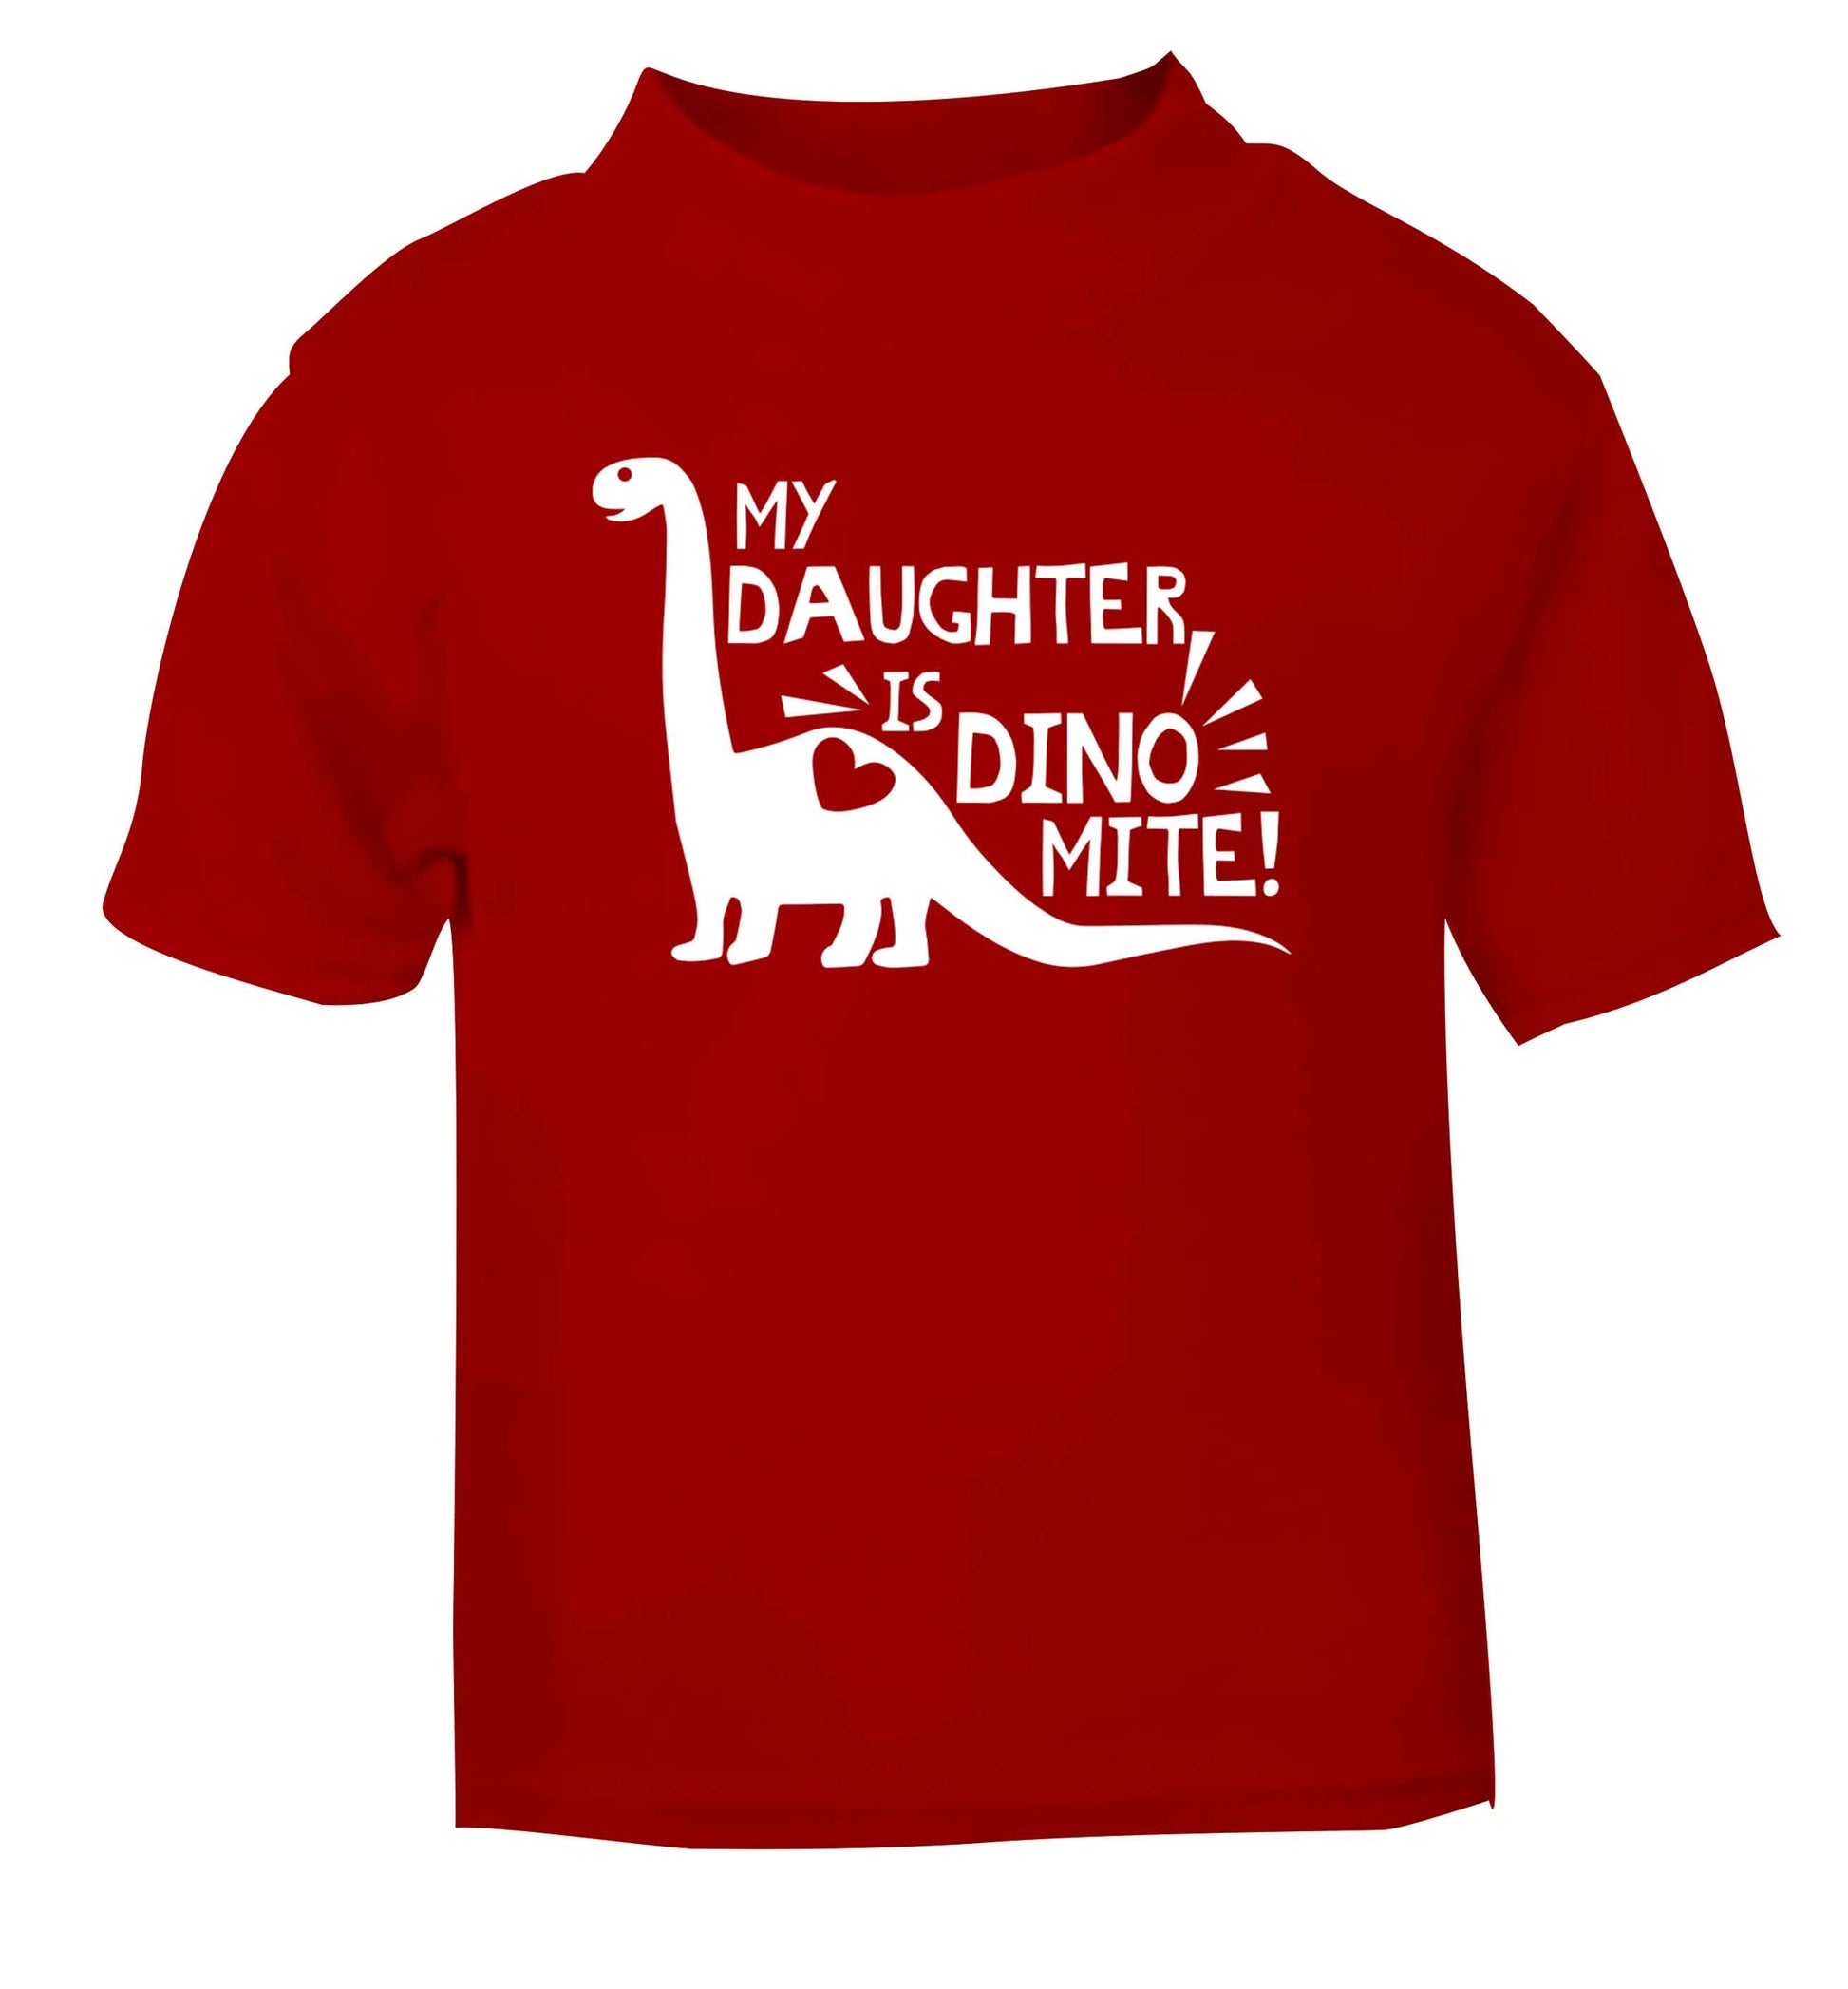 My daughter is dinomite! red Baby Toddler Tshirt 2 Years